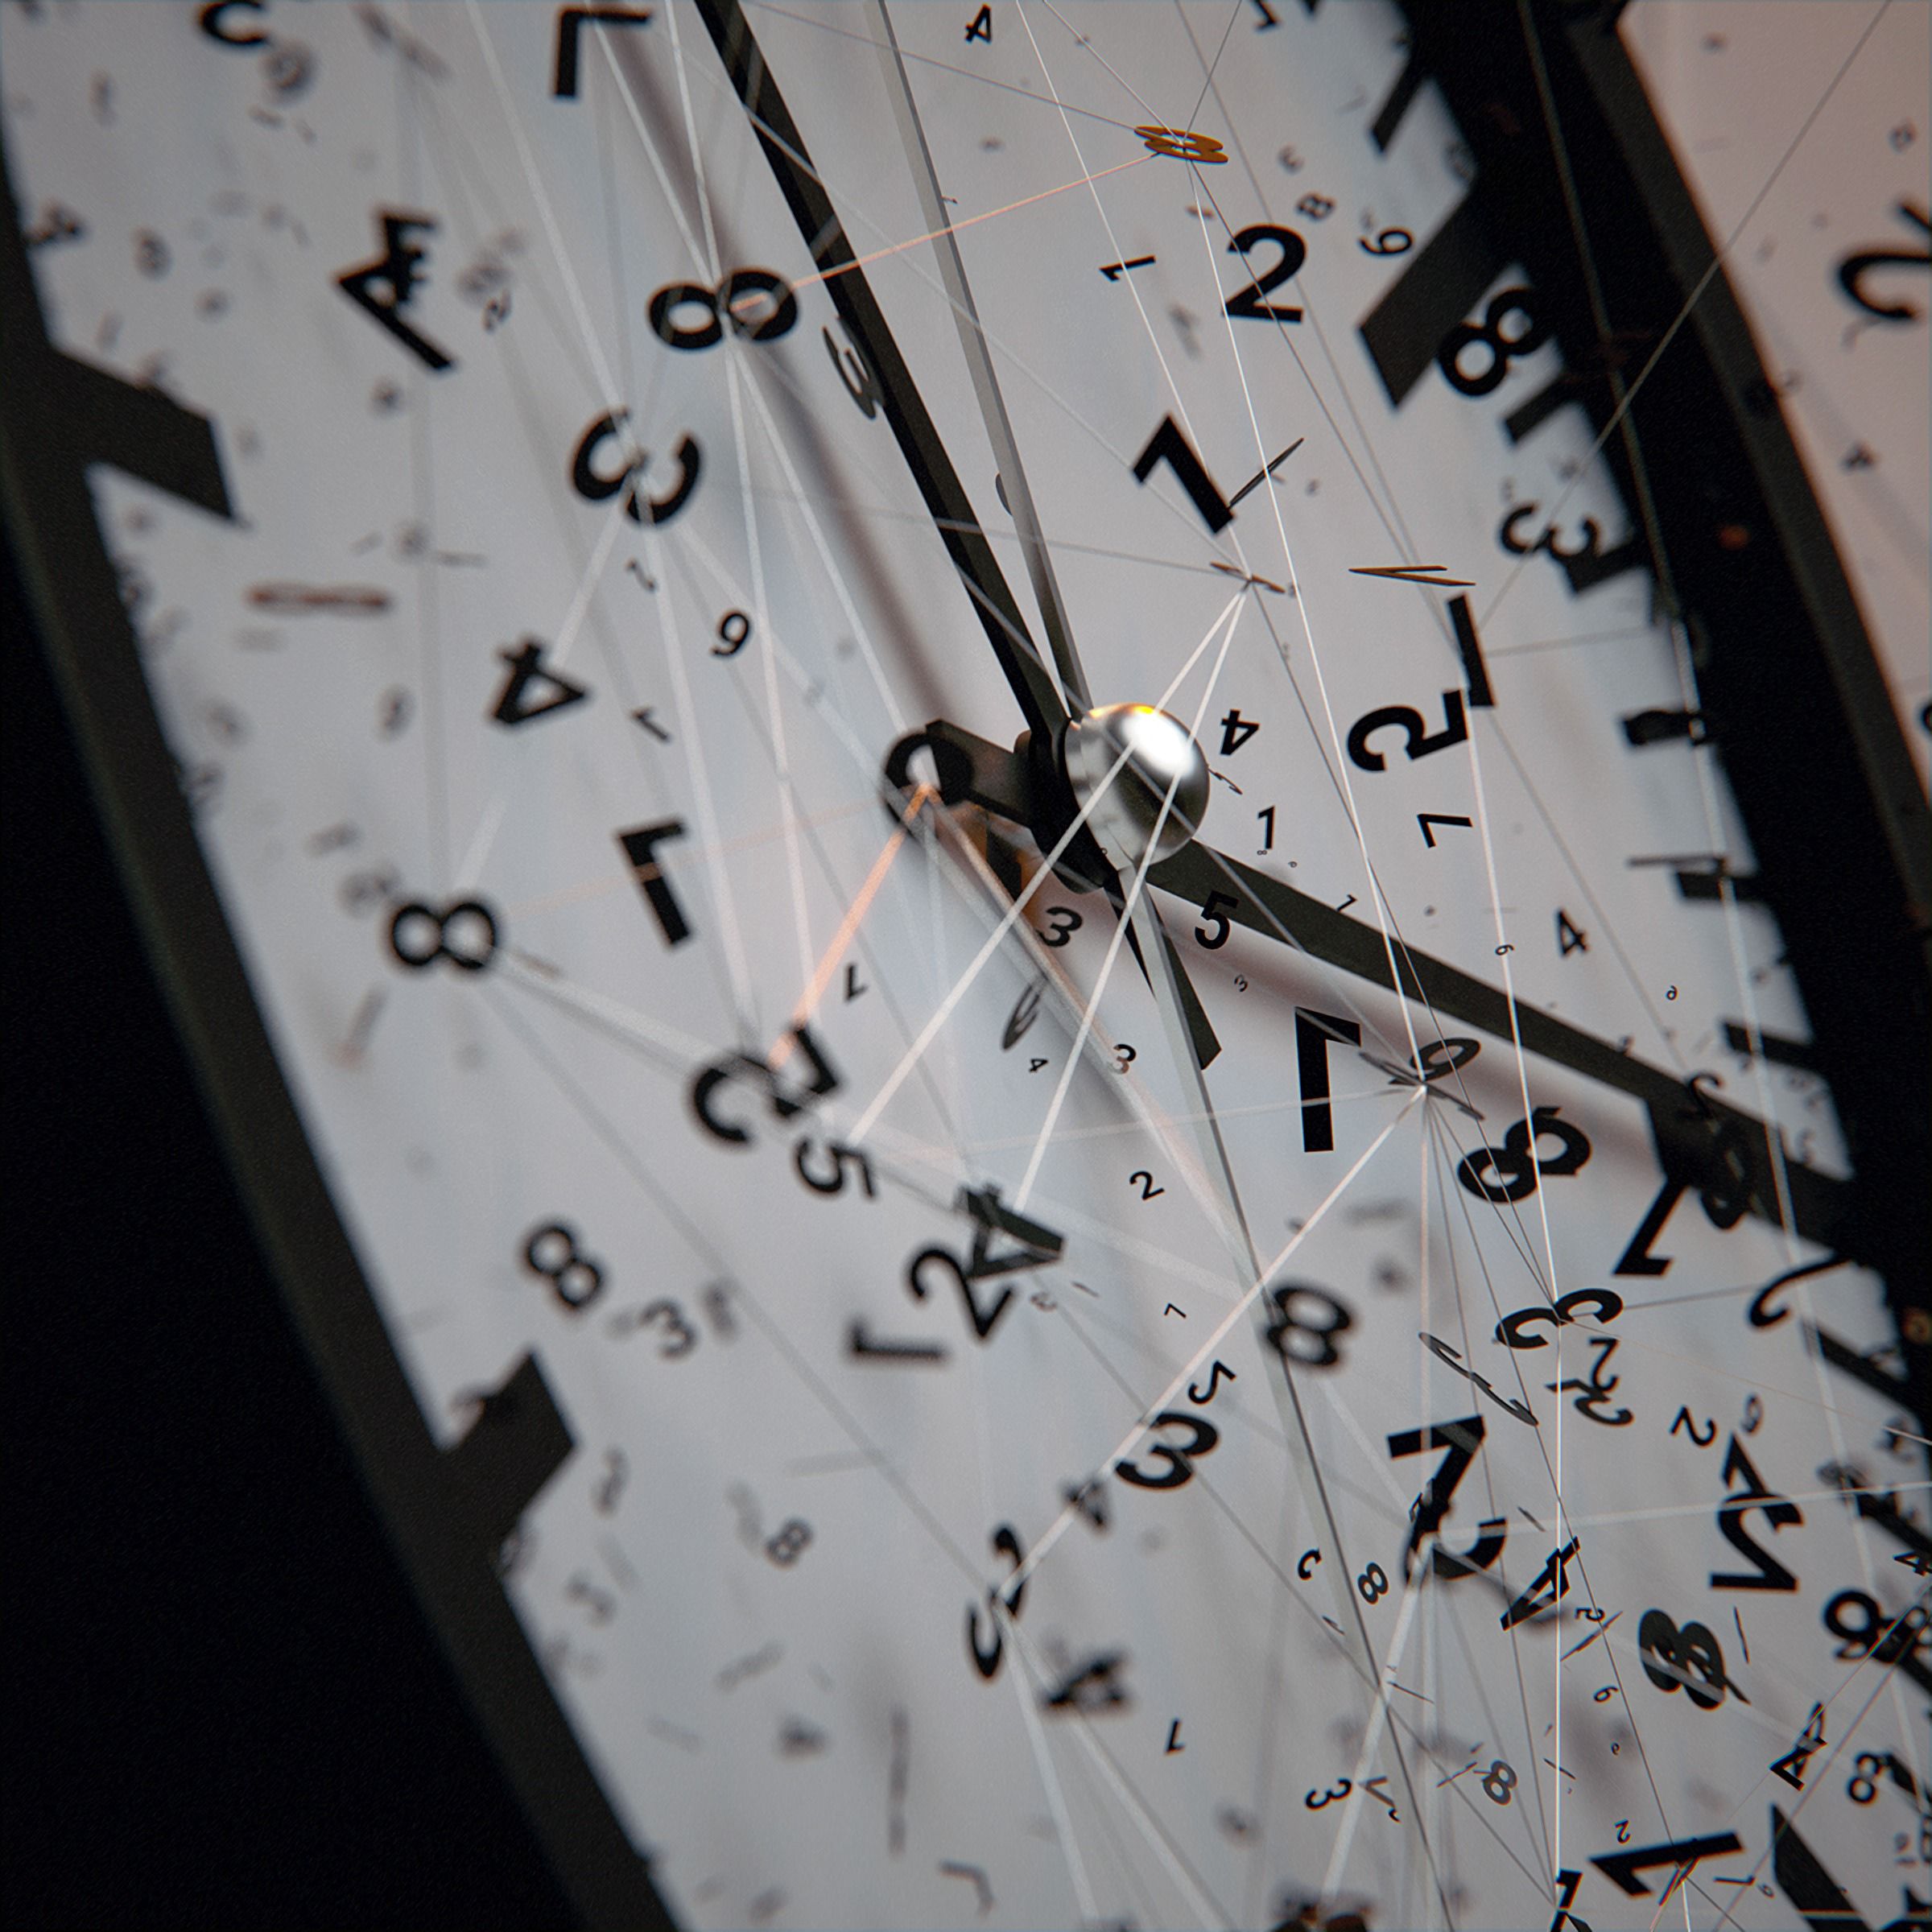 miscellanea, clock, numbers, dial, intricate, miscellaneous, clock face, lines, confused, arrows 4K